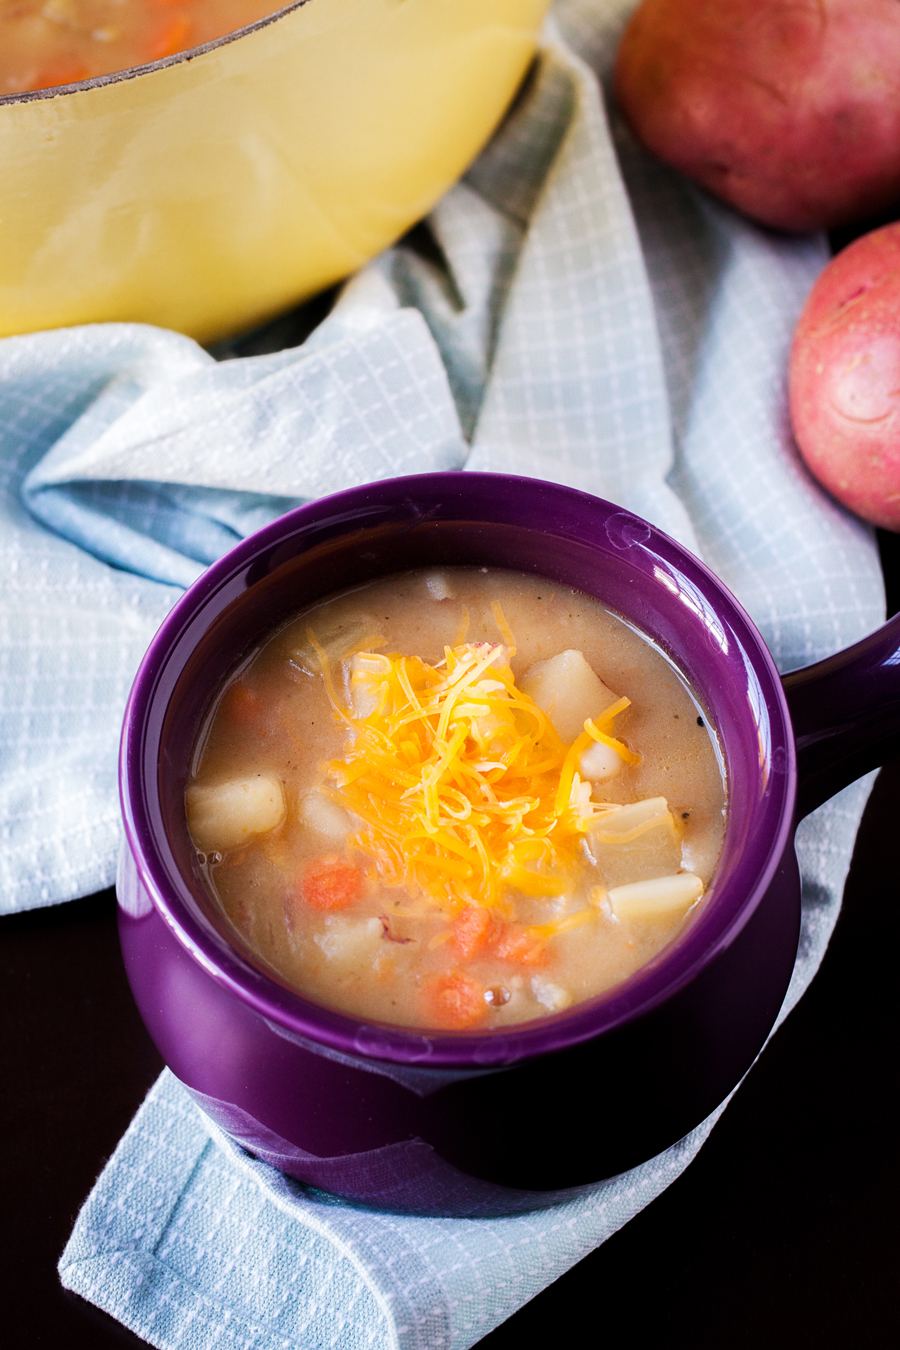 This potato soup will warm and nourish your insides! 